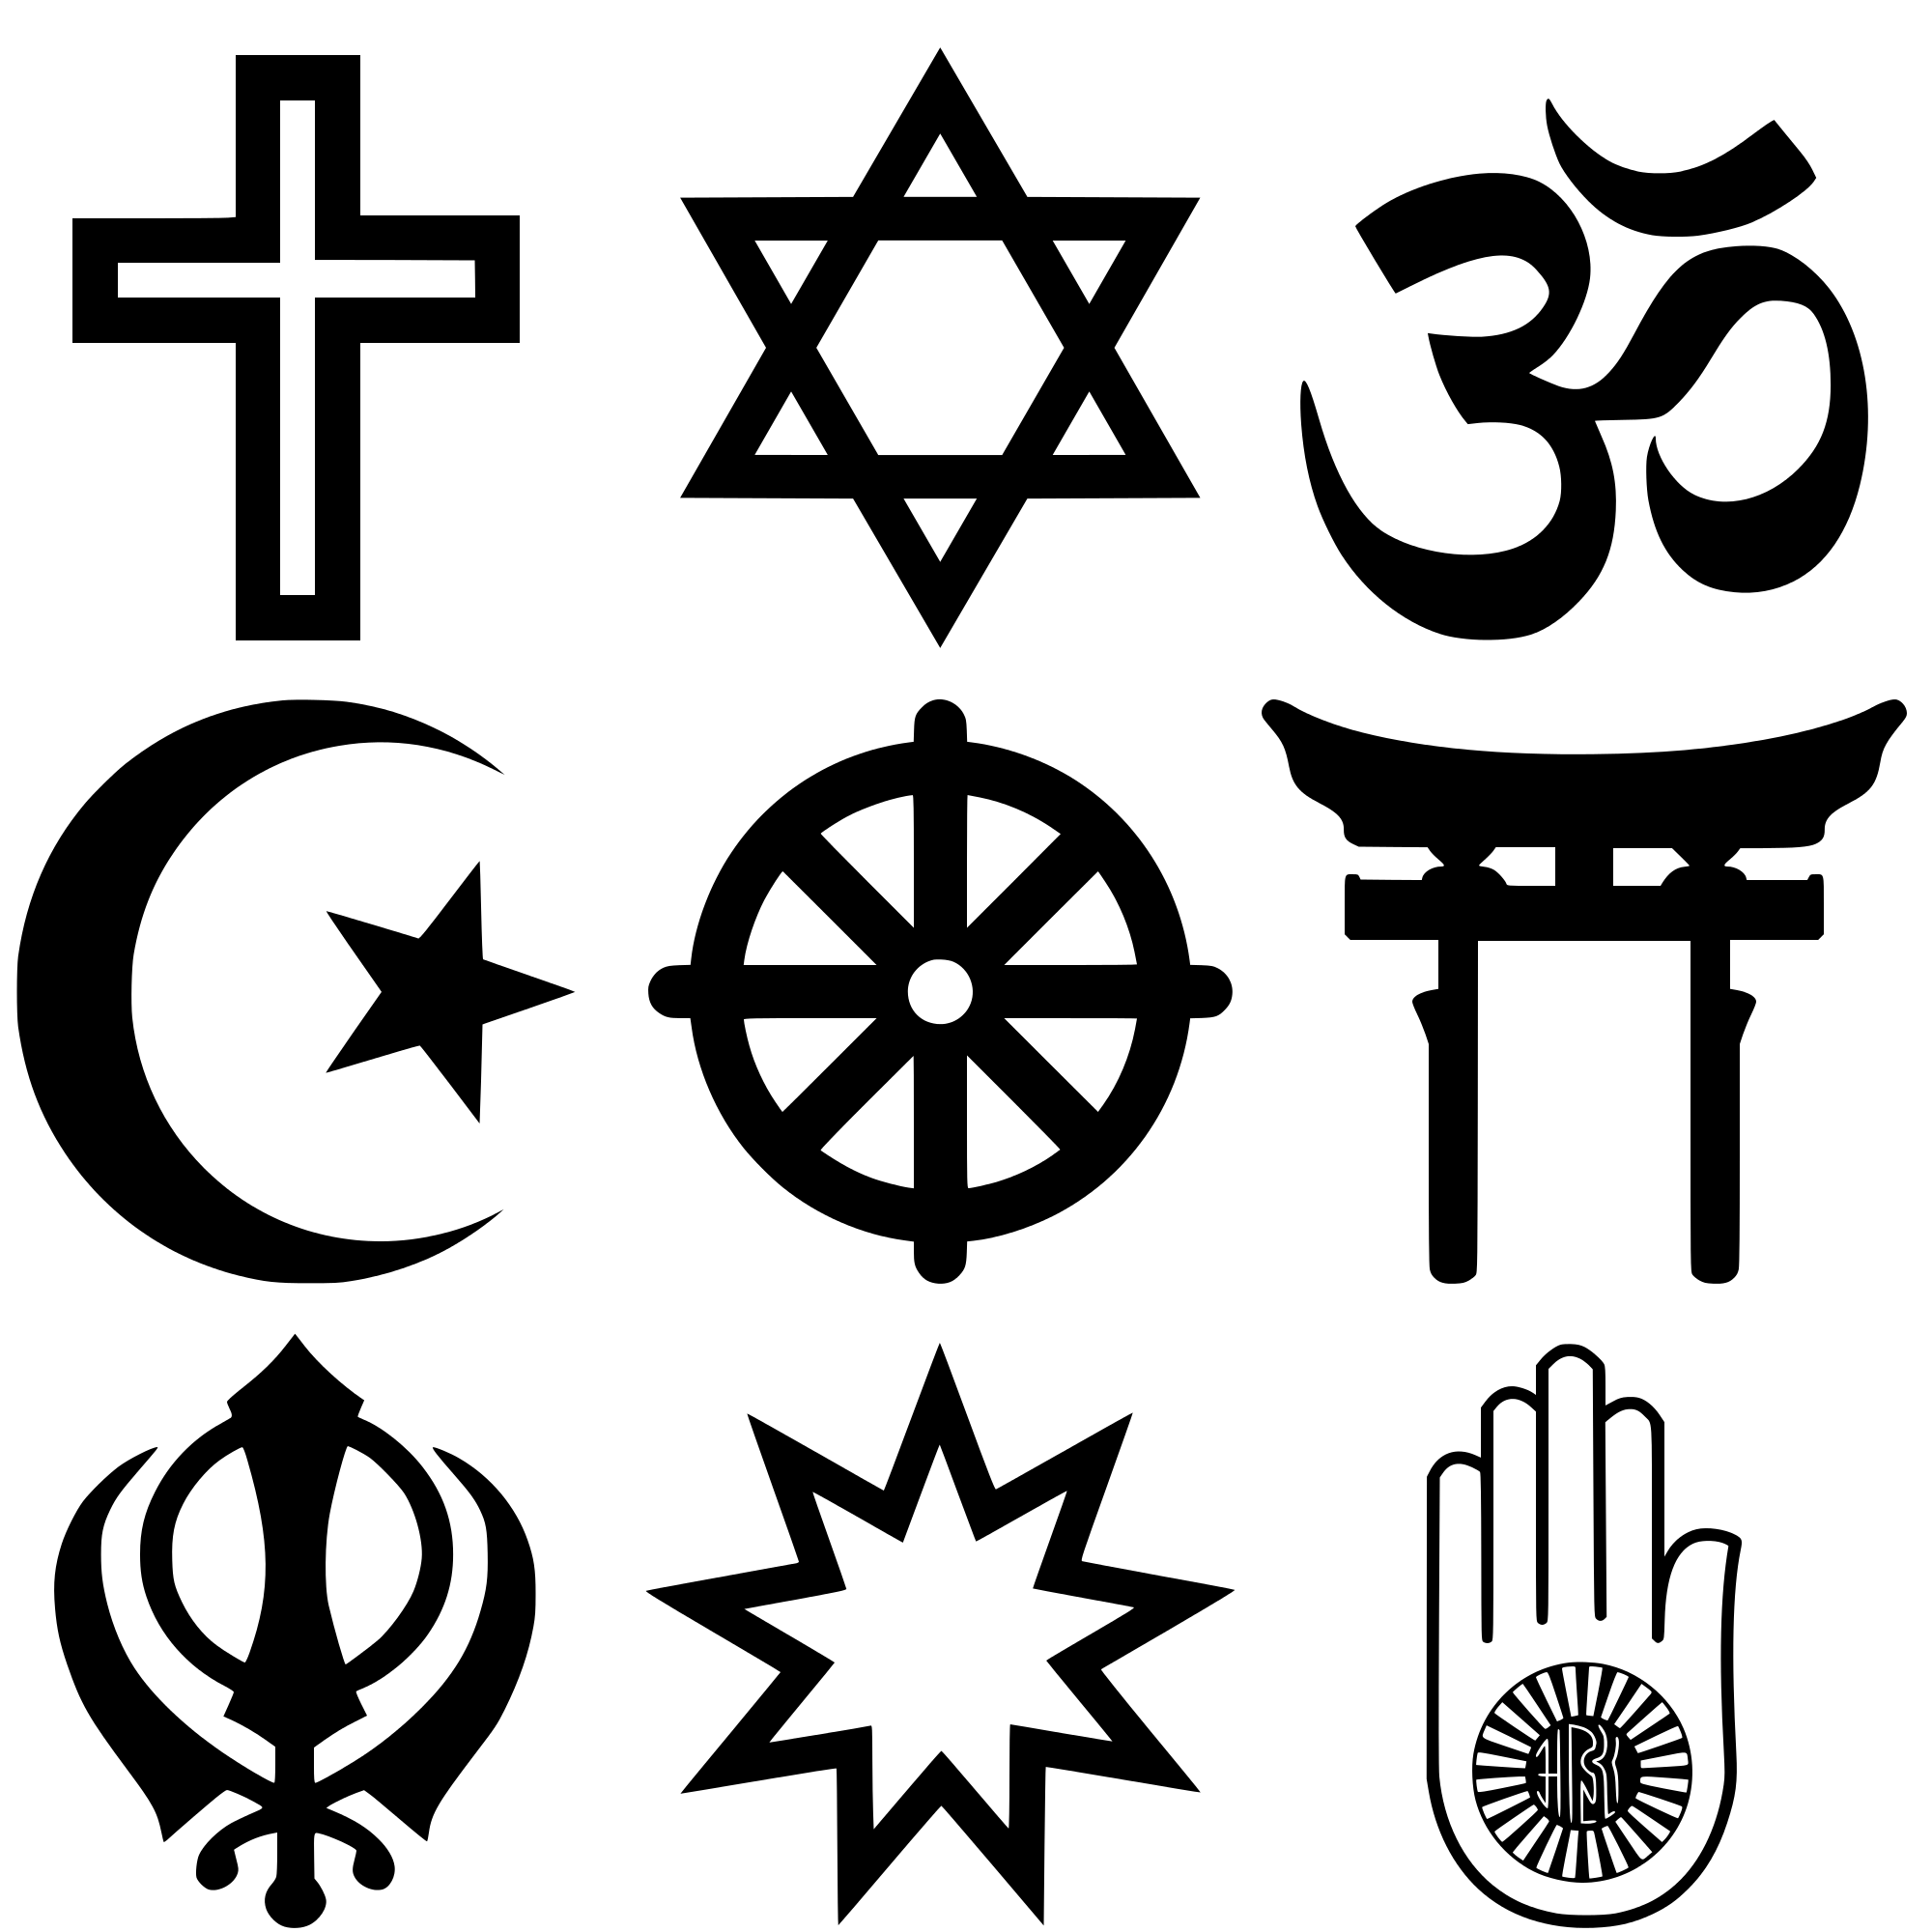 Religion Logo - All religions are not equal